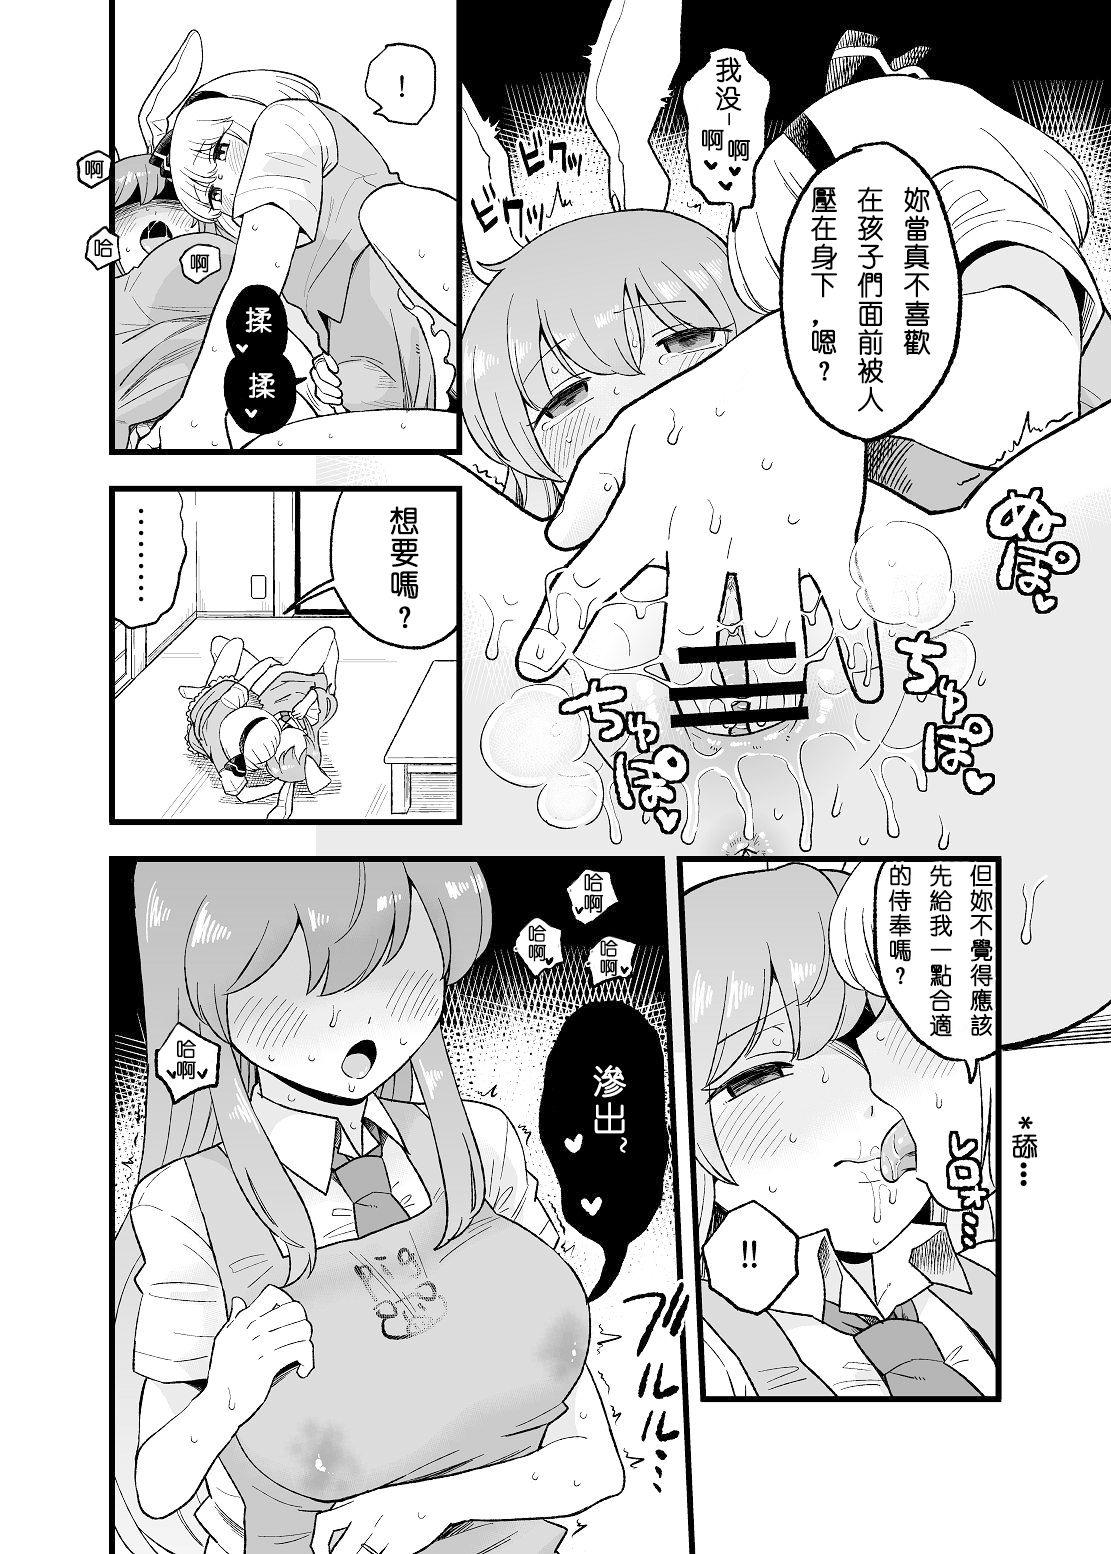 This Yoru no Mamange | 夜中之滿♀月 - Touhou project Pigtails - Page 4